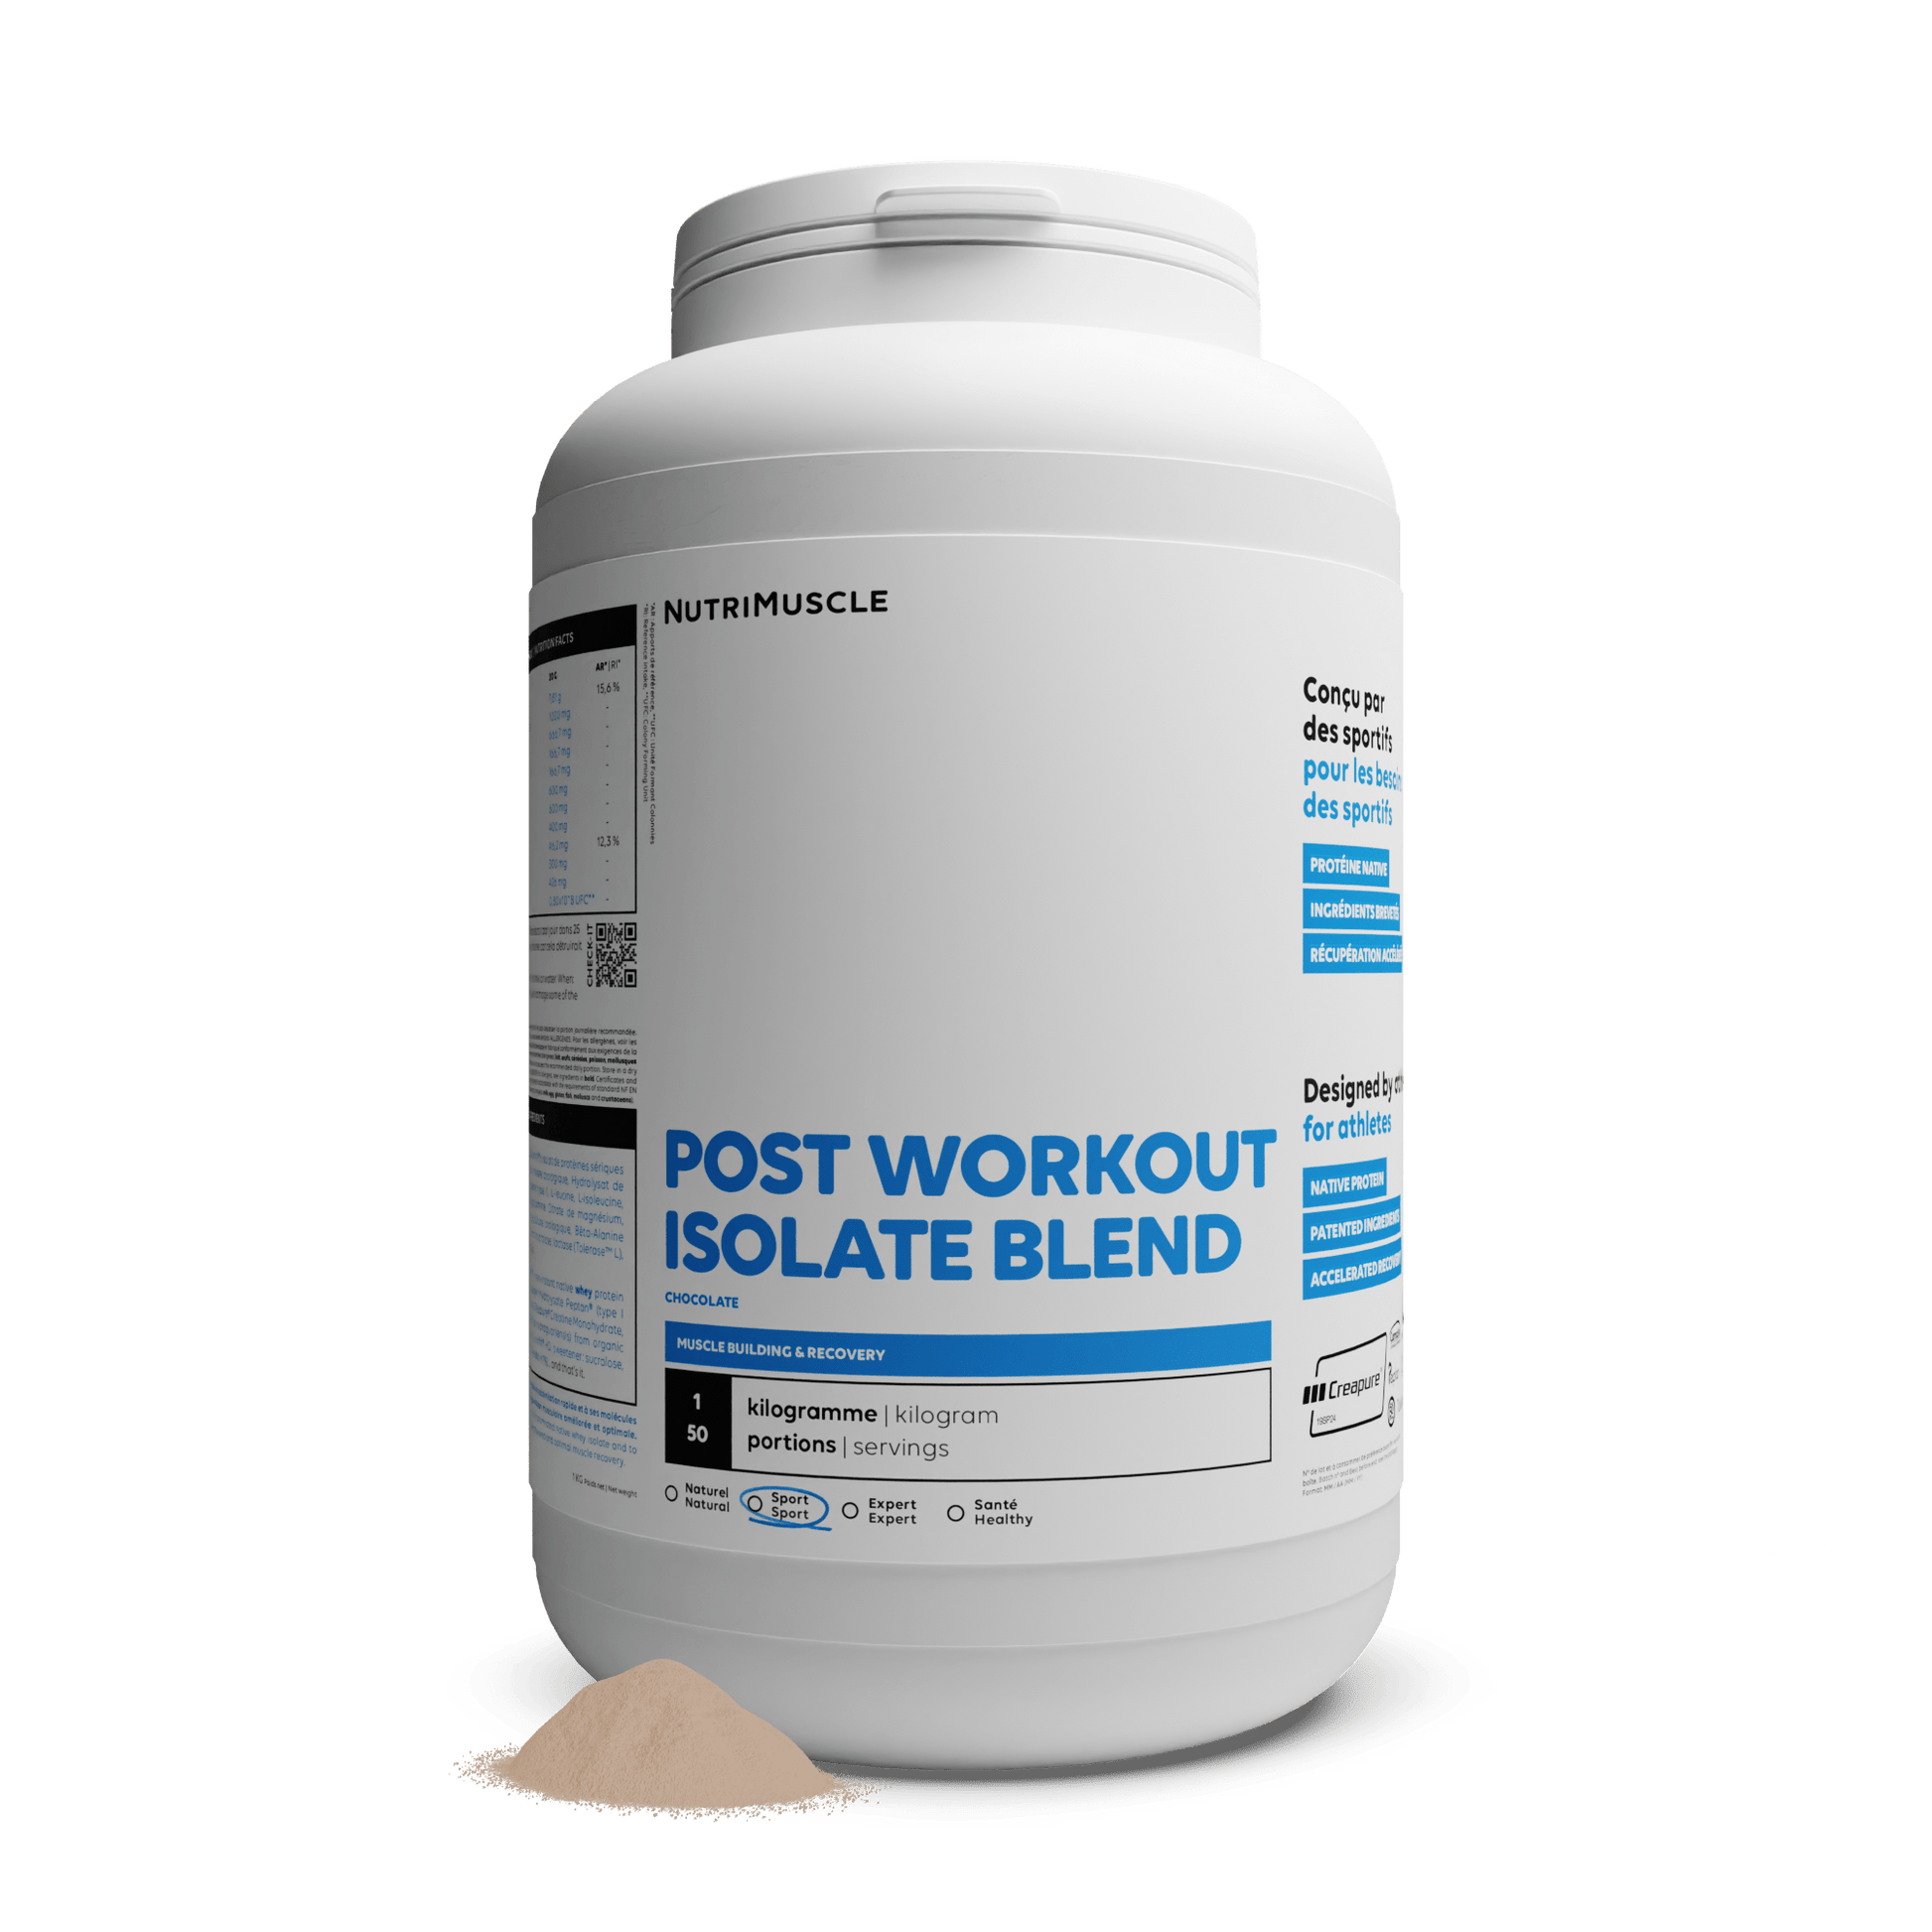 Nutrimuscle Protéines Post Workout Isolate Blend